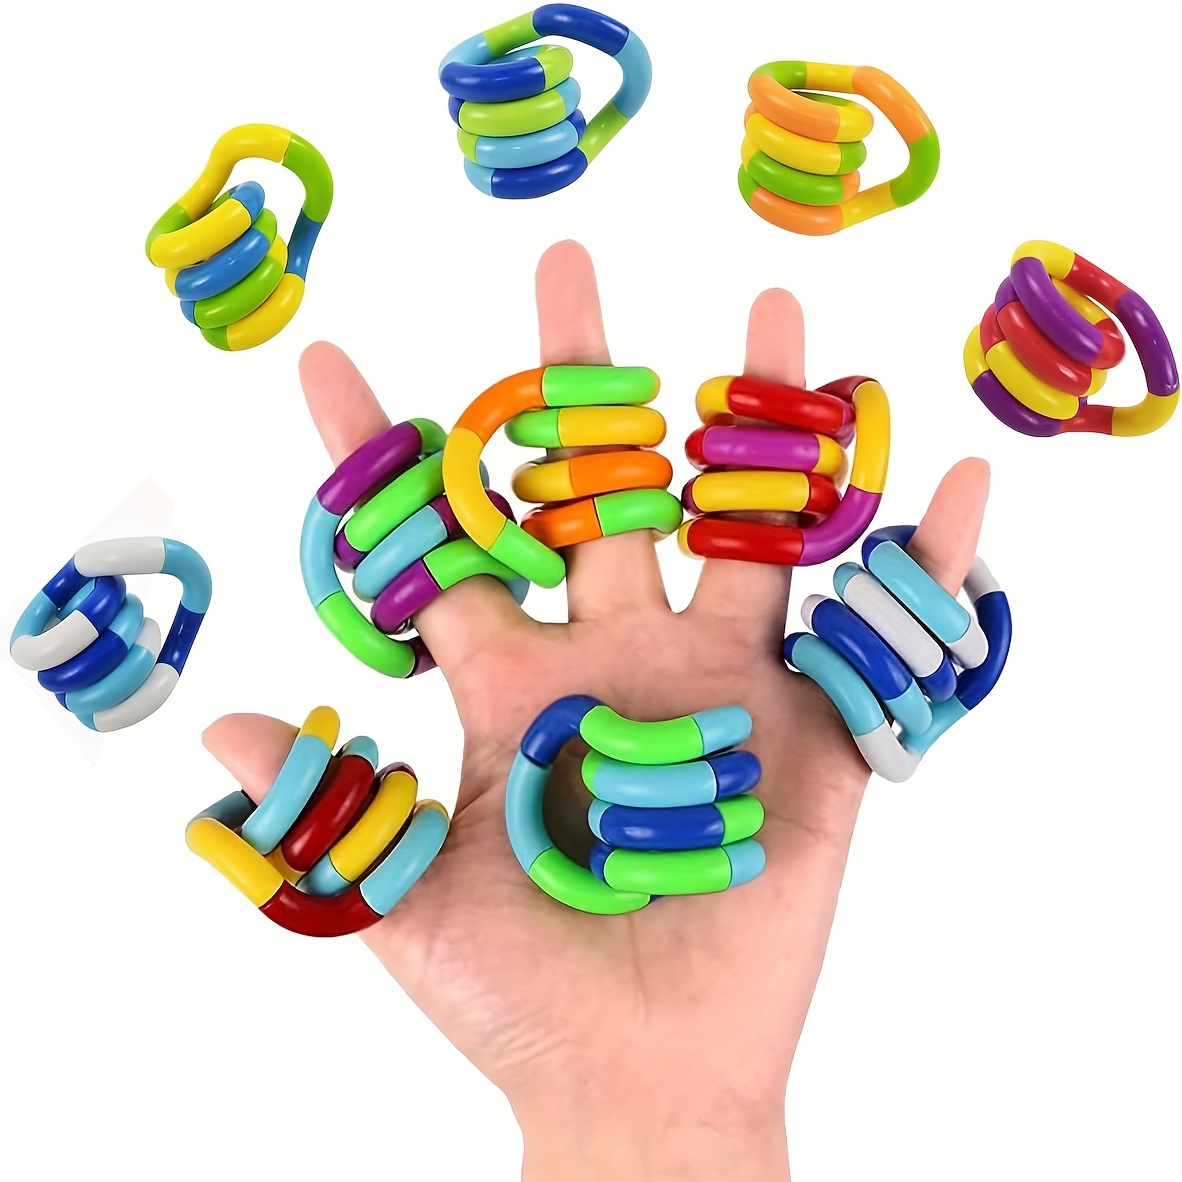 Tangle Toy, Fidget Twister, Hand Fidget Toy, Twisted Decompression Toy, 5  Pcs Twister Fidget Toy, Autism Hand Tangles Hand Toy, Winding Feeling  Creati